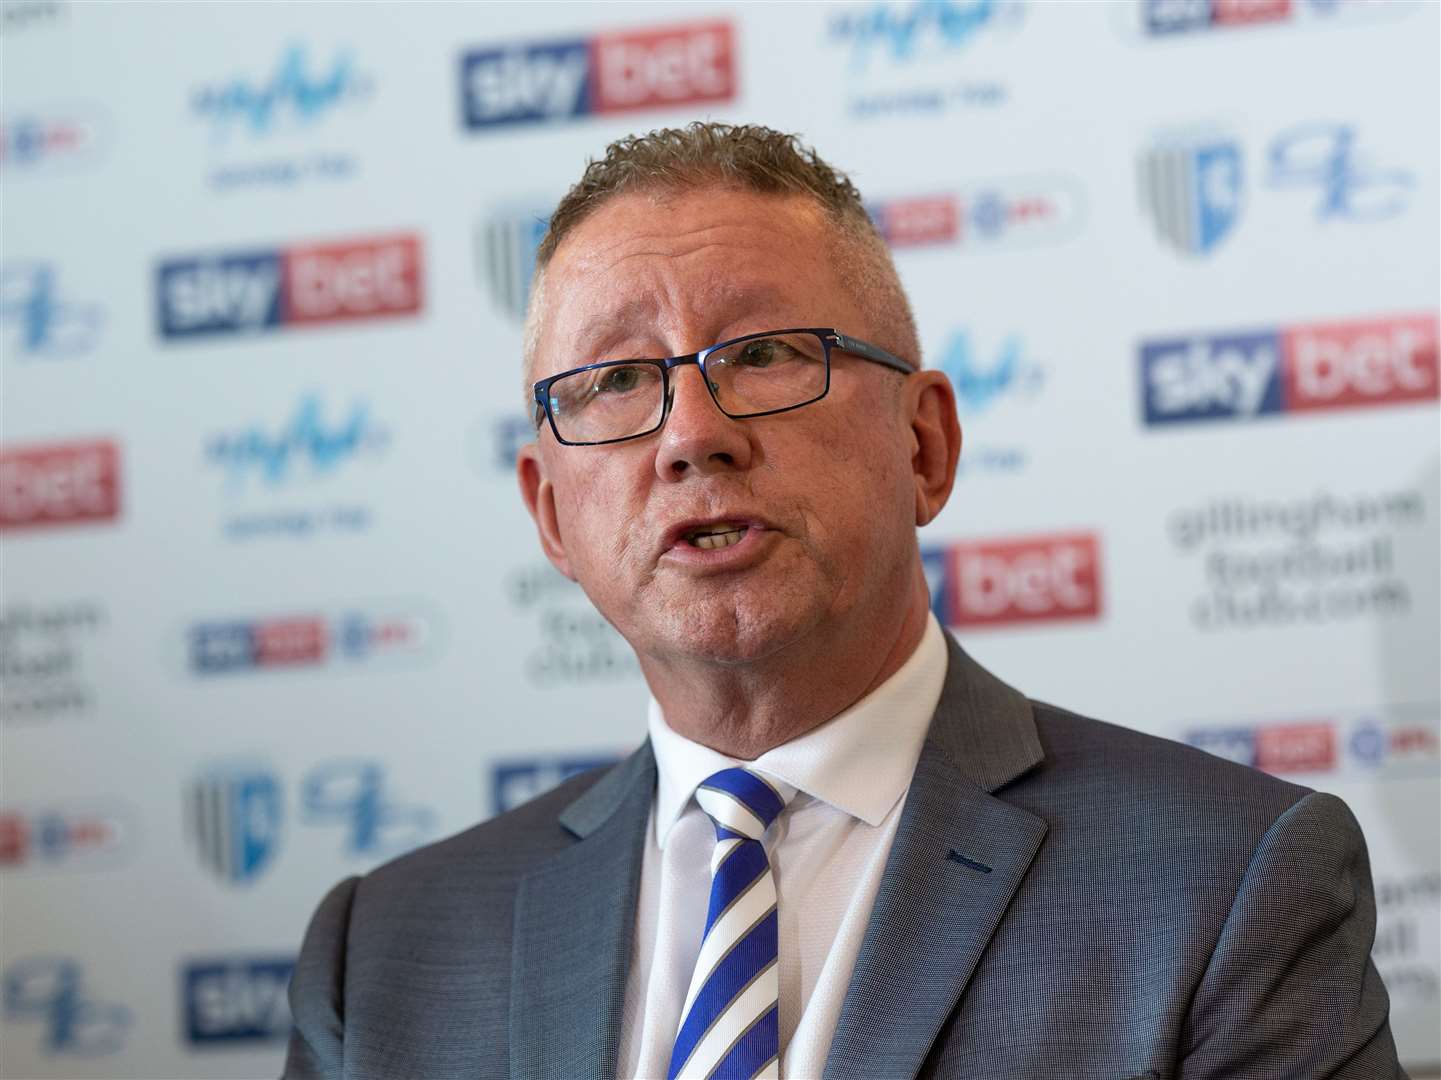 Gillingham chairman Paul Scally has to consider what is best for the Gills